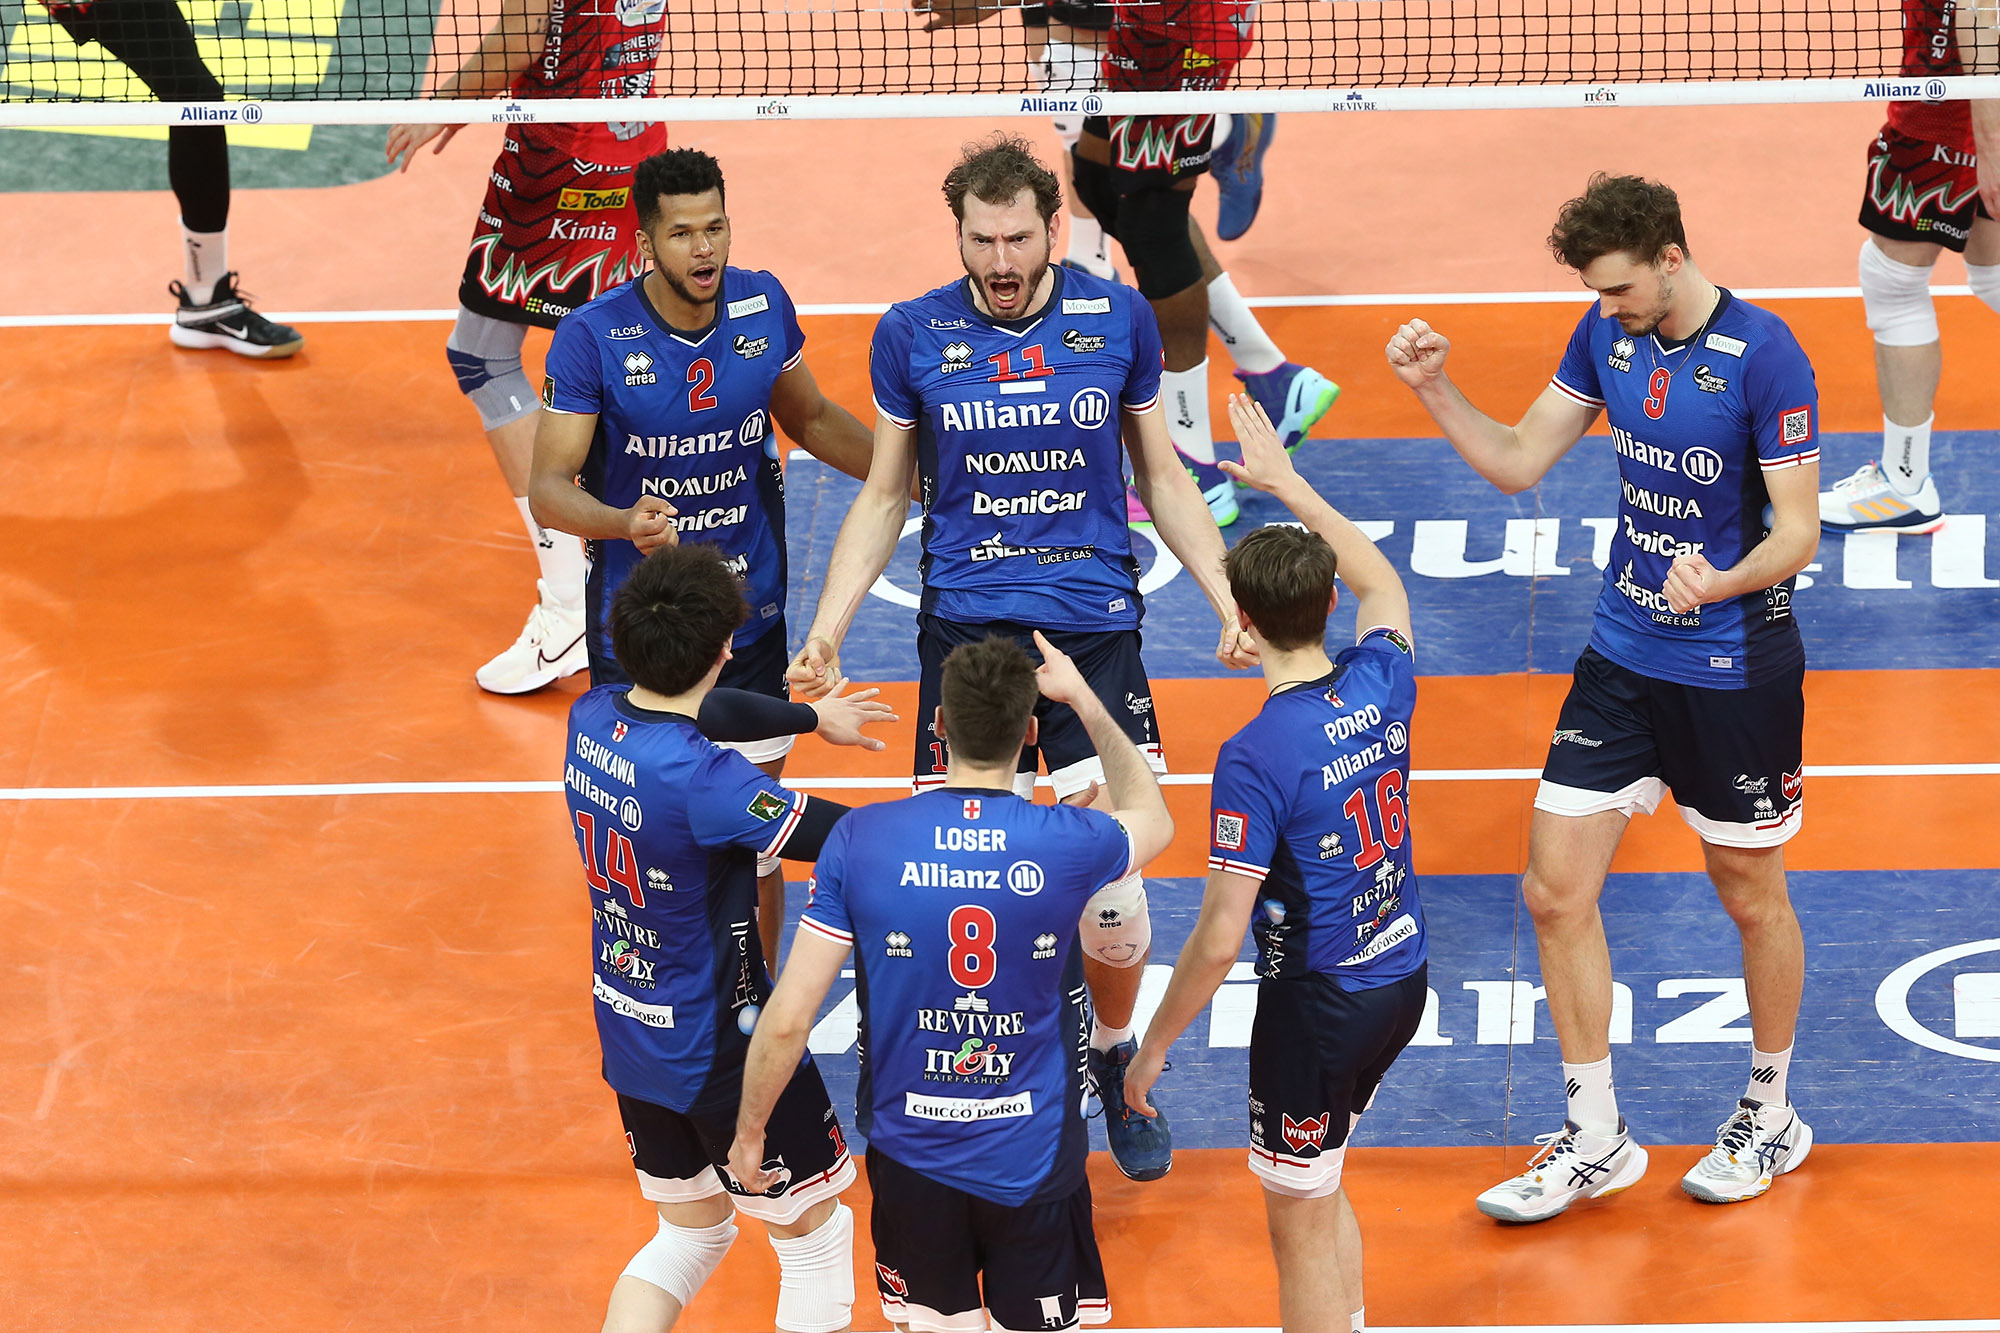 The day has come, Game 5 approaching Lega Pallavolo Serie A